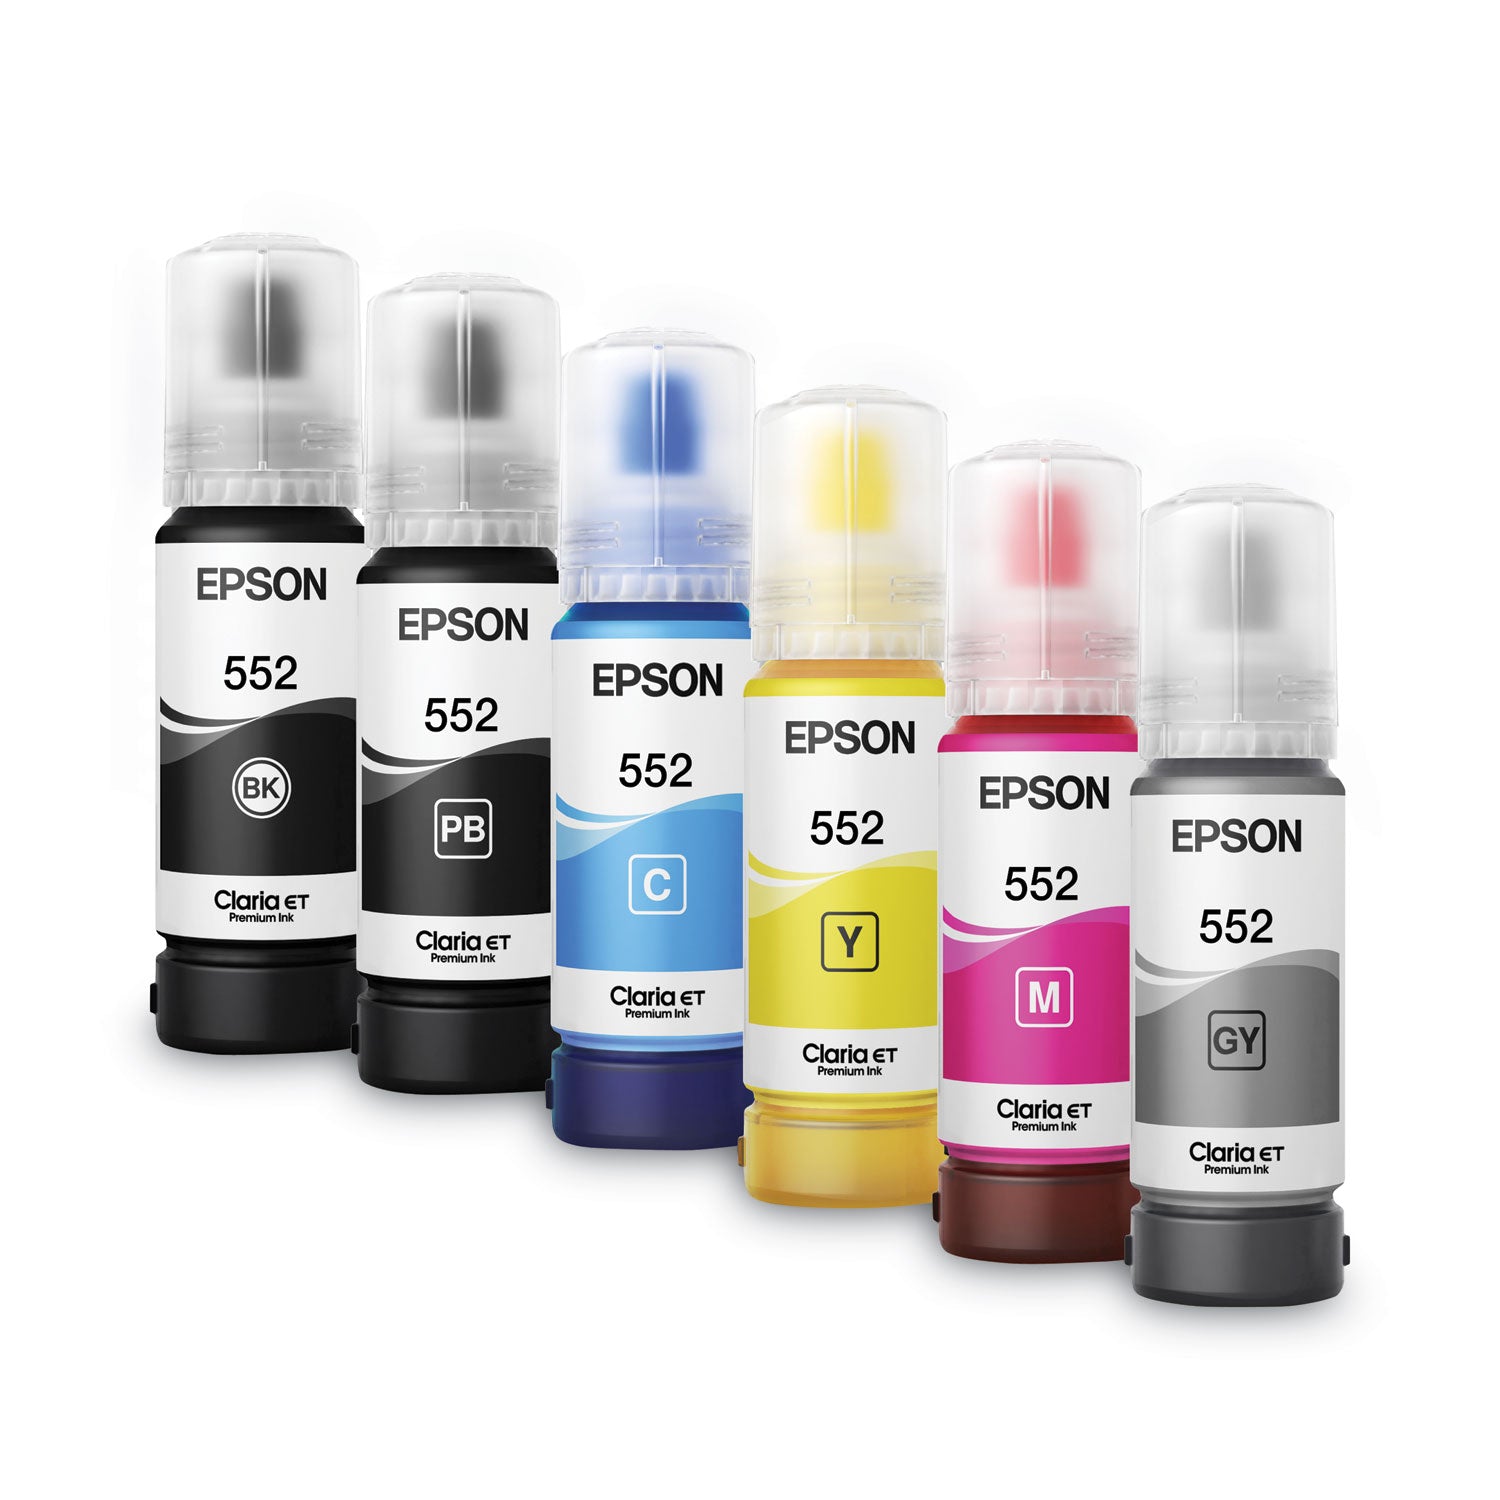 t552920s-t552-claria-high-yield-ink-70-ml-black-cyan-gray-magenta-yellow-5-pack_epst552920s - 5